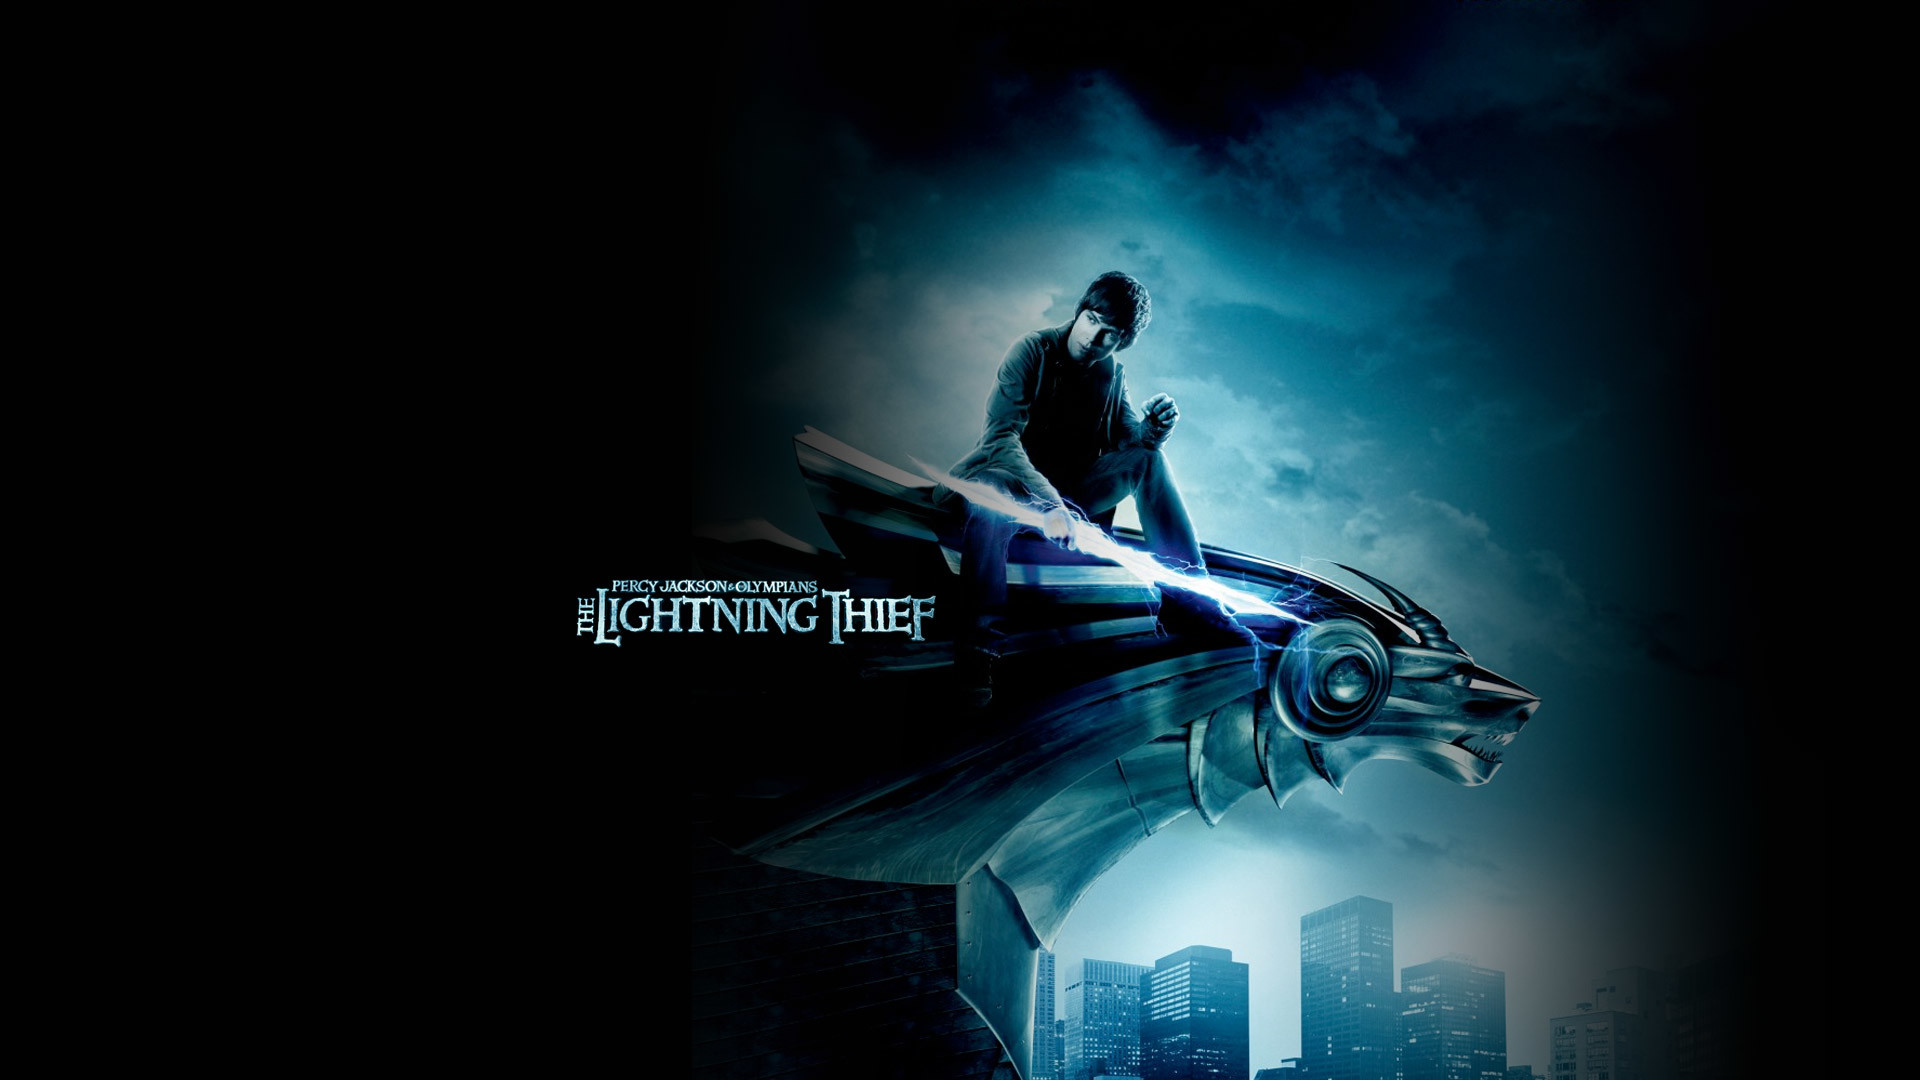 Percy Jackson Sea of monsters wallpaper